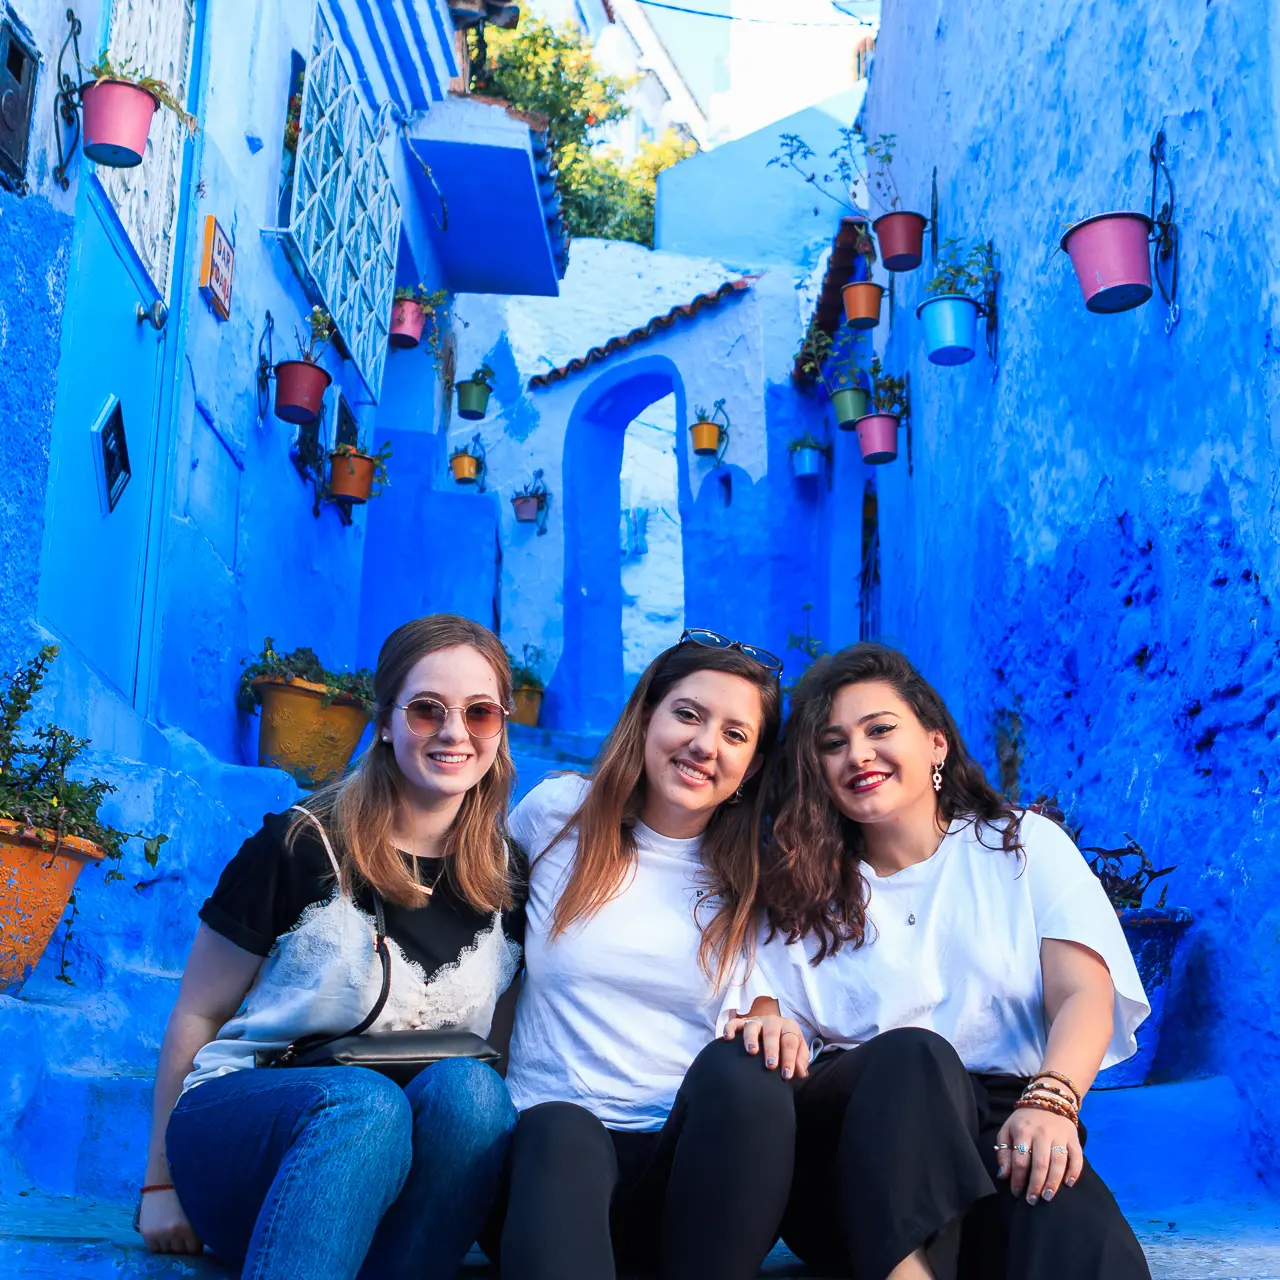 Excursion to Morocco - study Spanish abroad